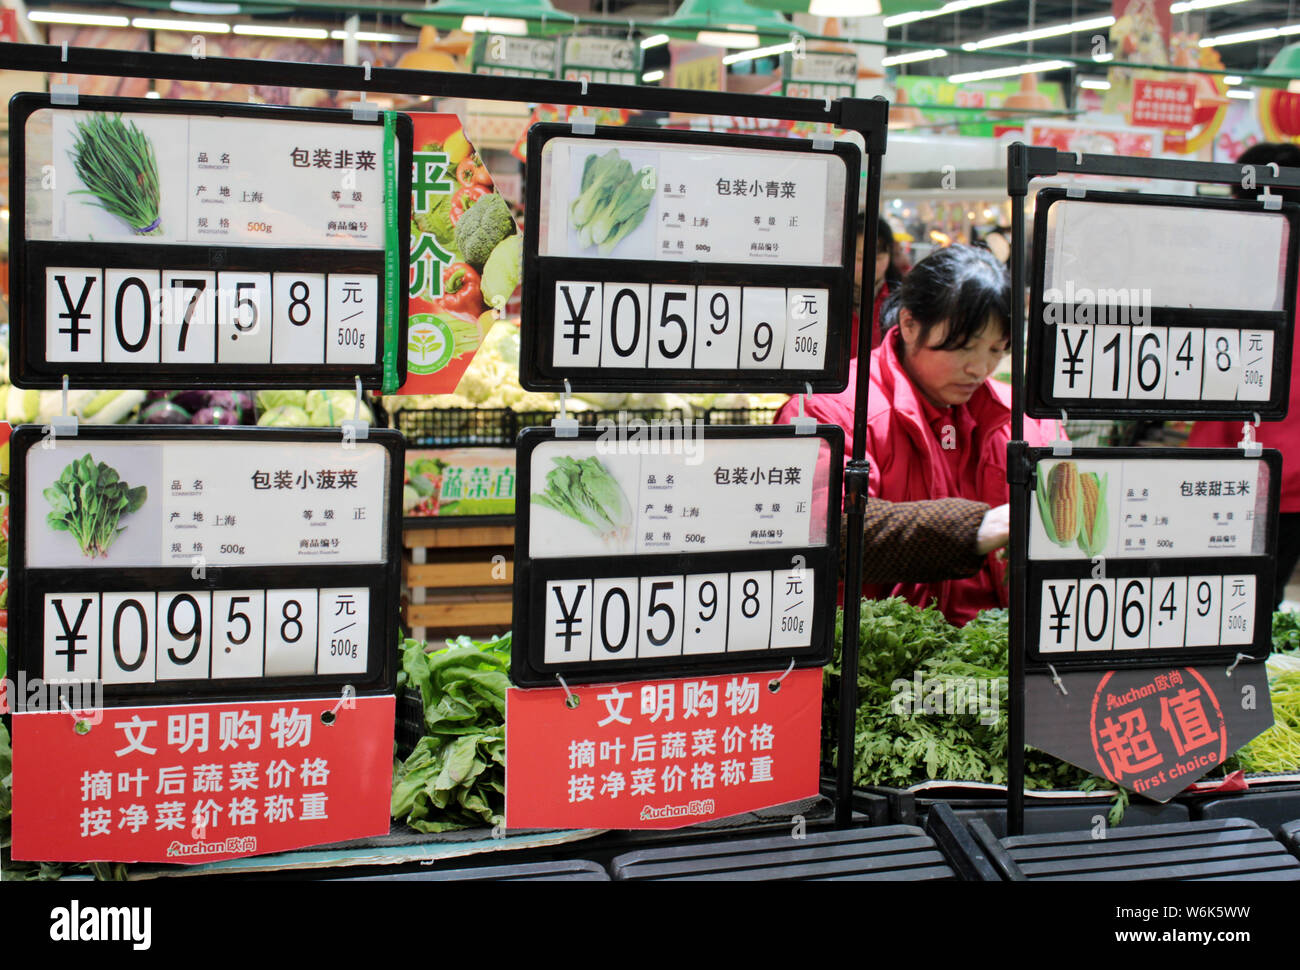 A customer shops for vegetables at a supermarket in Changzhou city, east China's Jiangsu province, 10 February 2018.   China's Consumer Confidence Ind Stock Photo